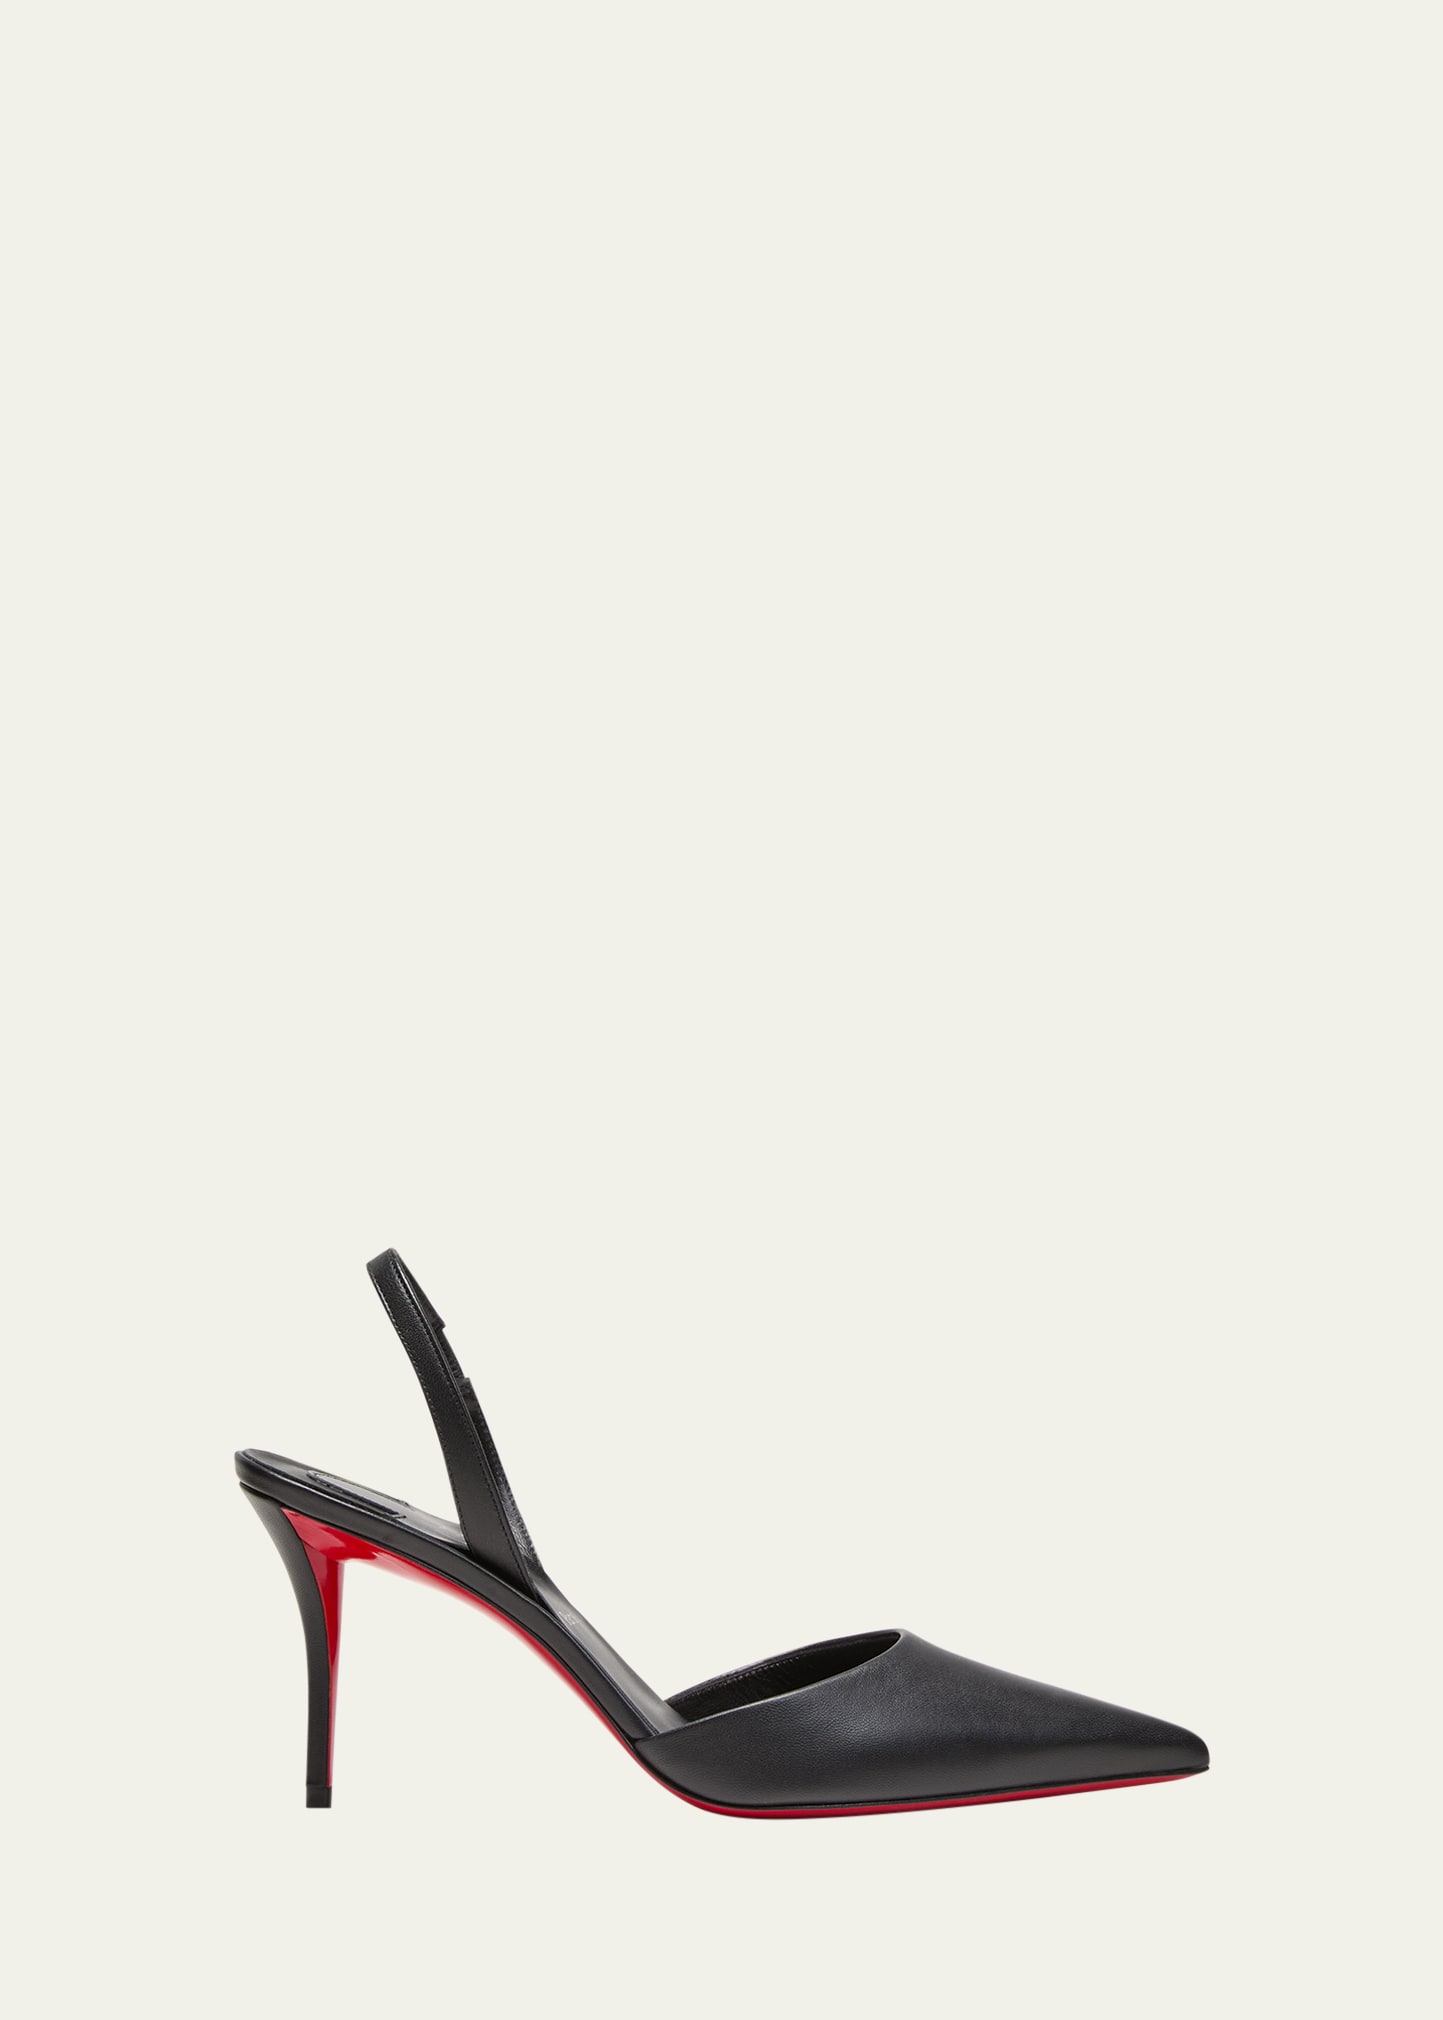 Apostropha Leather Slingback Red Sole Pumps